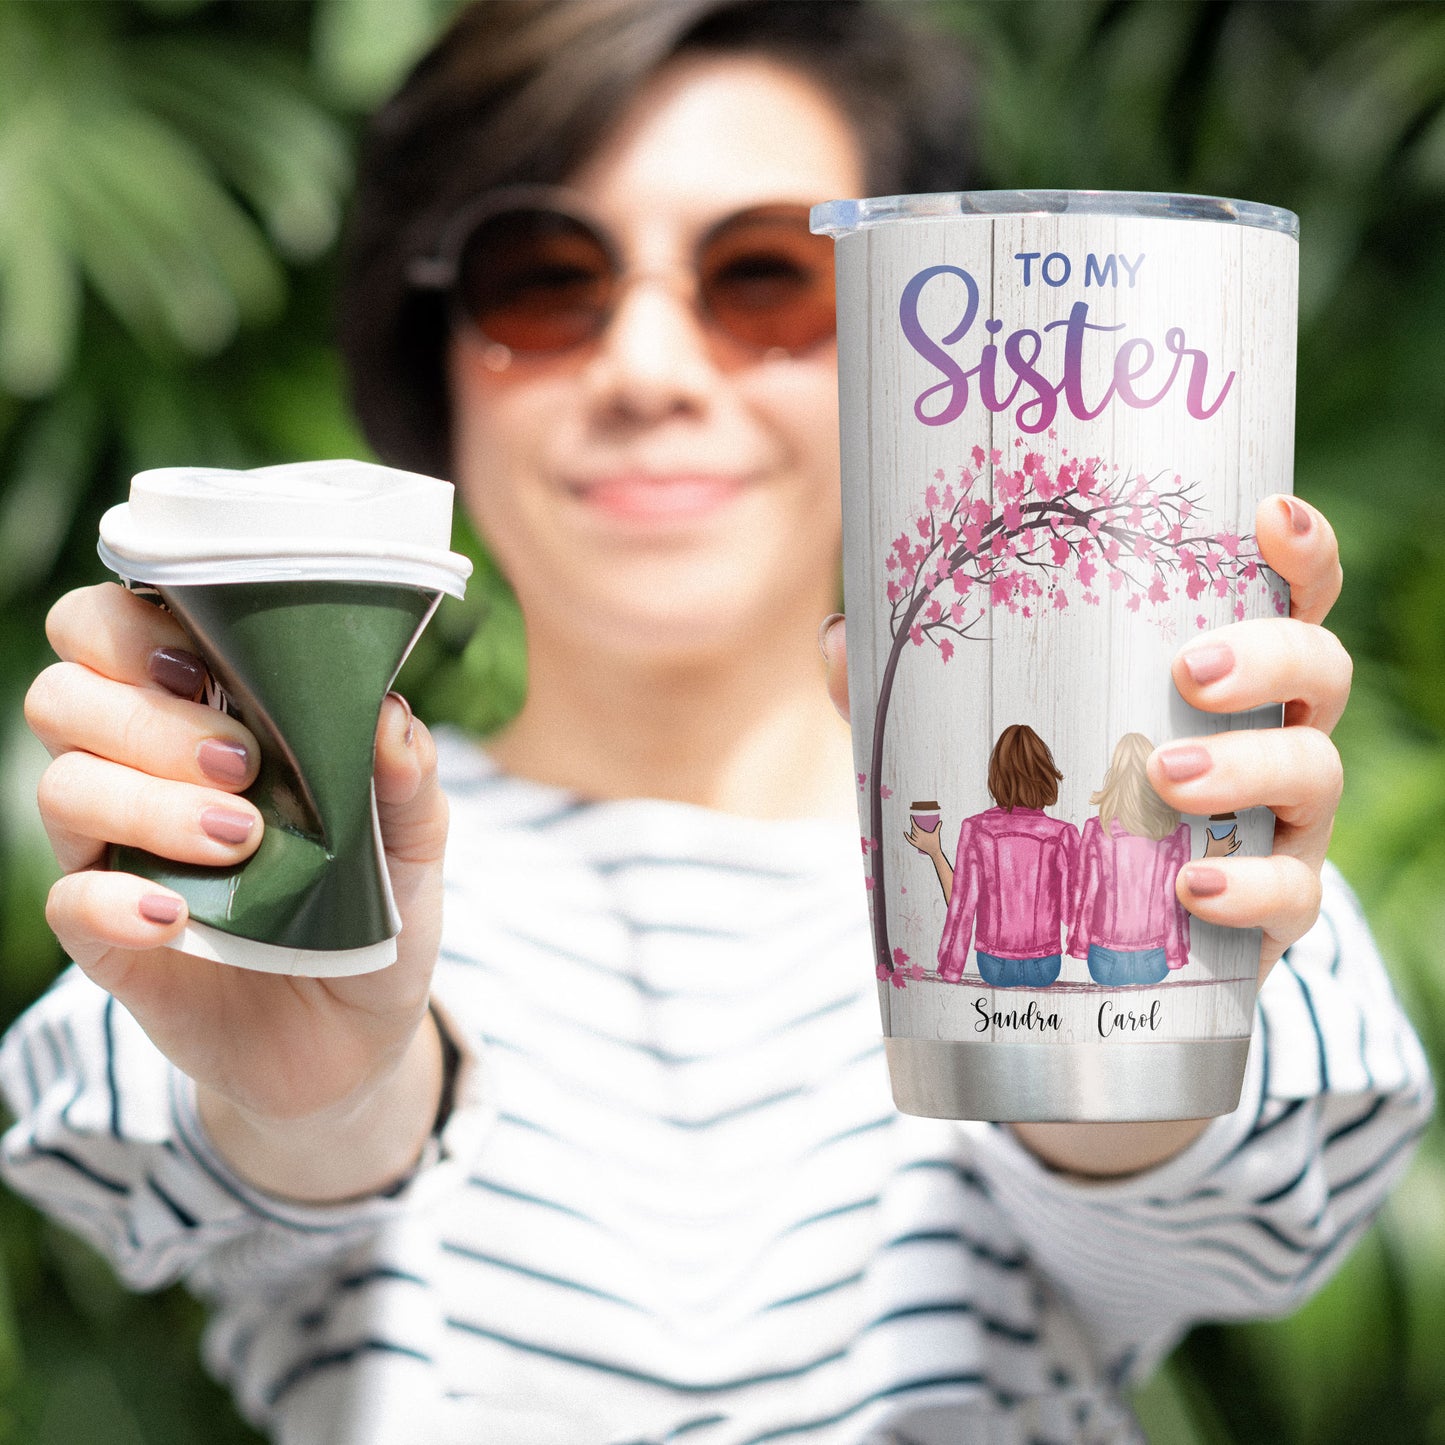 You Are My Sister - Thanks So Much For Everything, Sisters Custom Tumbler, Gift For Sisters-Macorner